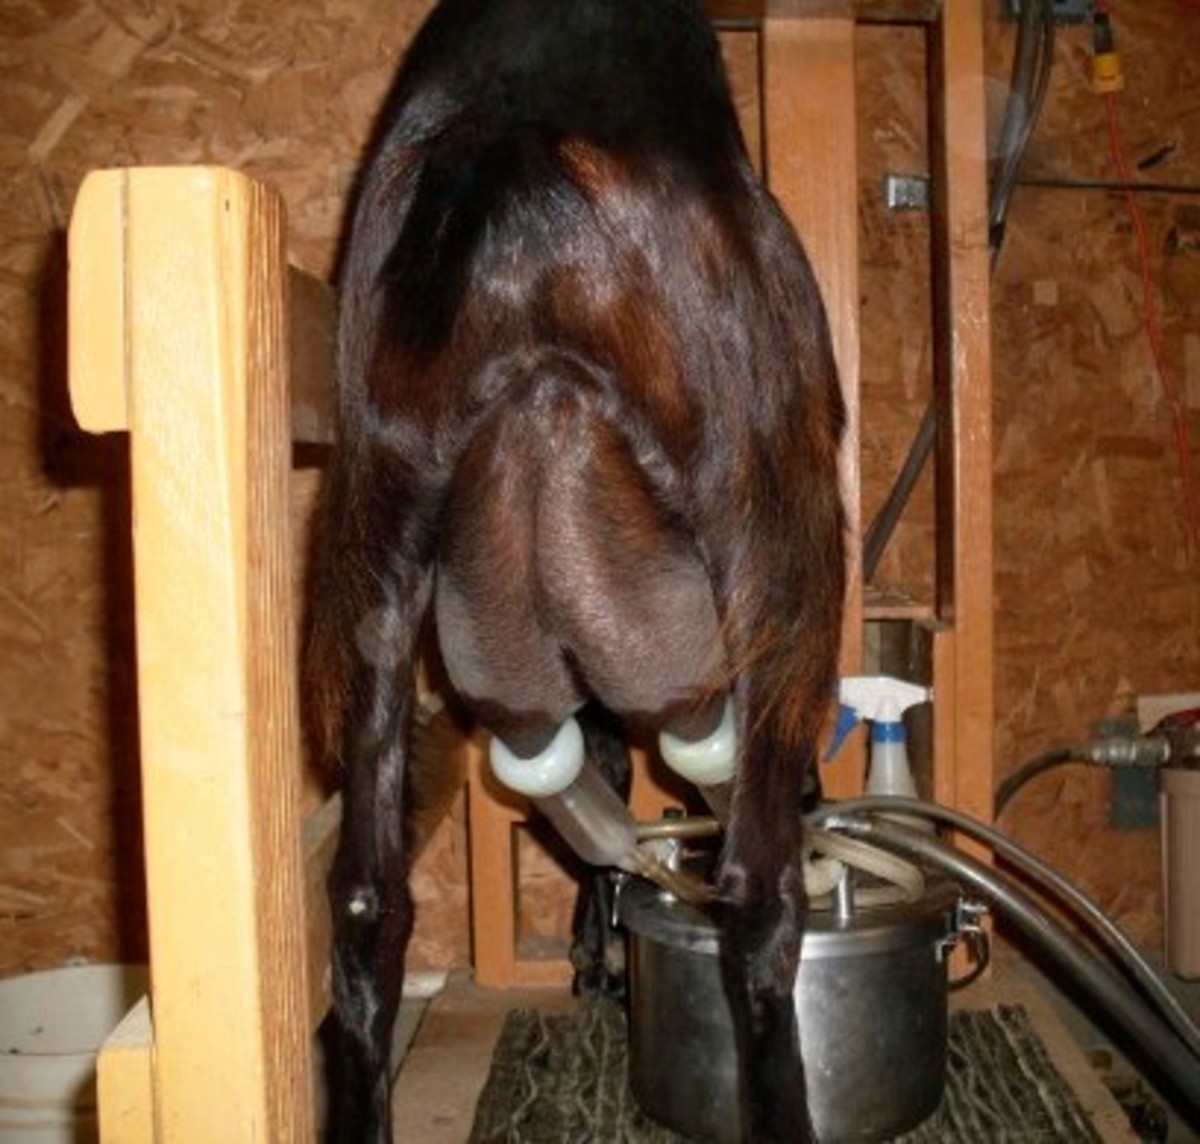 This goat has a reasonably good udder attachment, something of which not all milk goats can boast. Well attached udders tend to stay healthier.